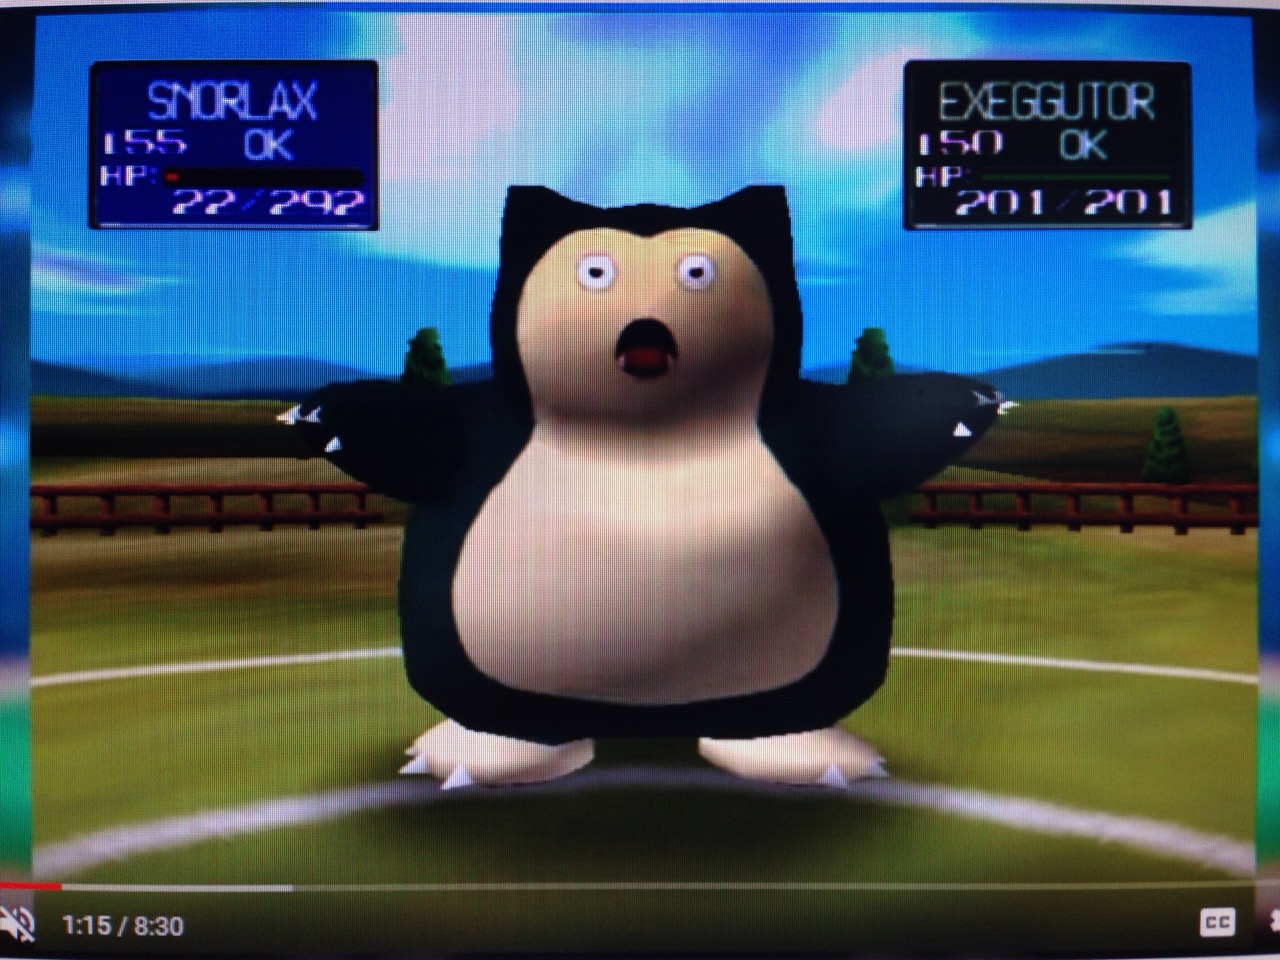 Snorlax's opened Eyes.